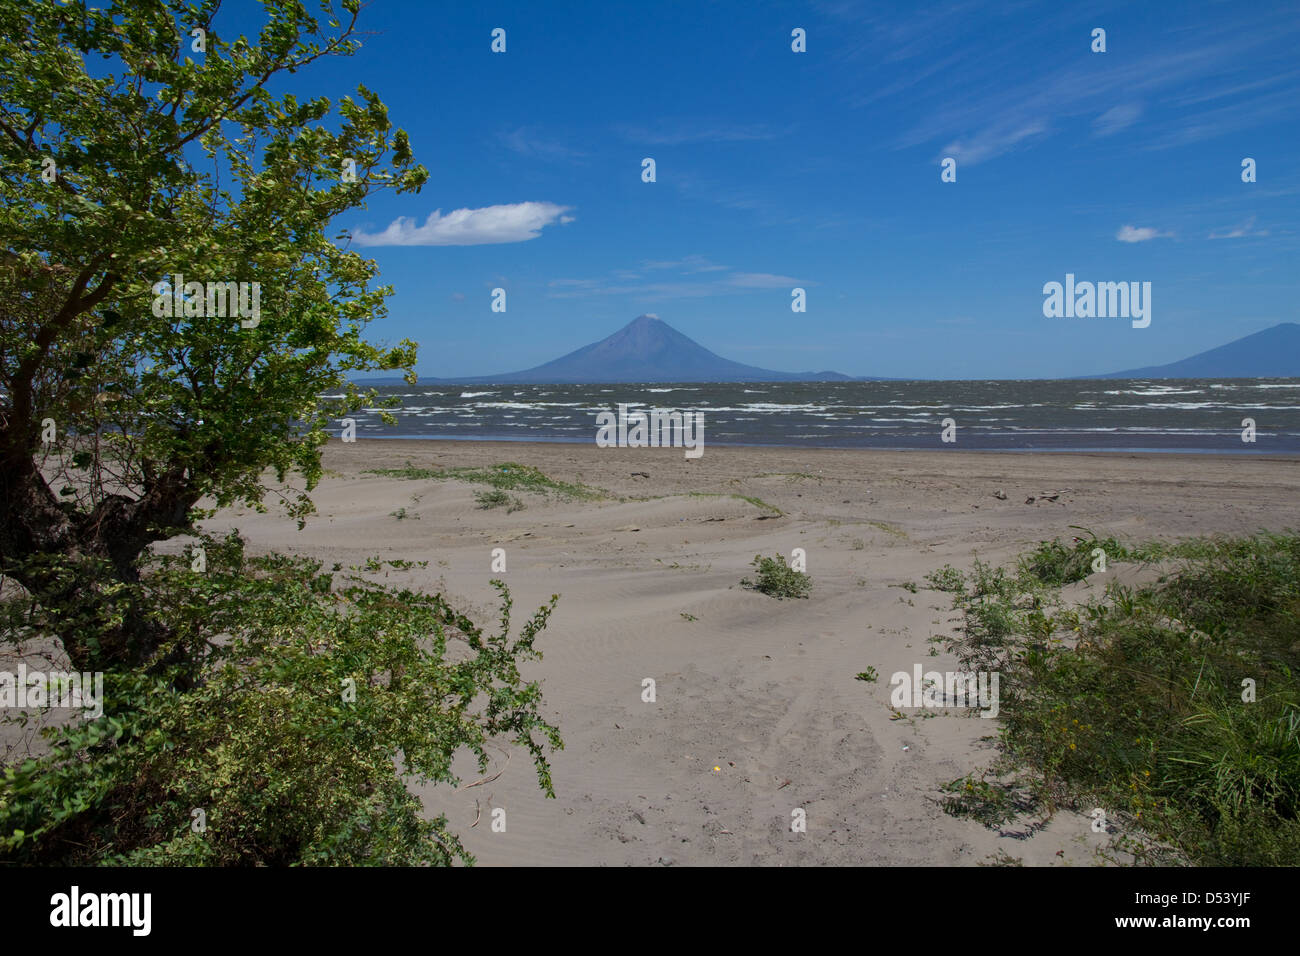 Ometepe Island in Lake Nicaragua provides a view of Volcan Concepcion, near Rivas, Nicaragua Stock Photo